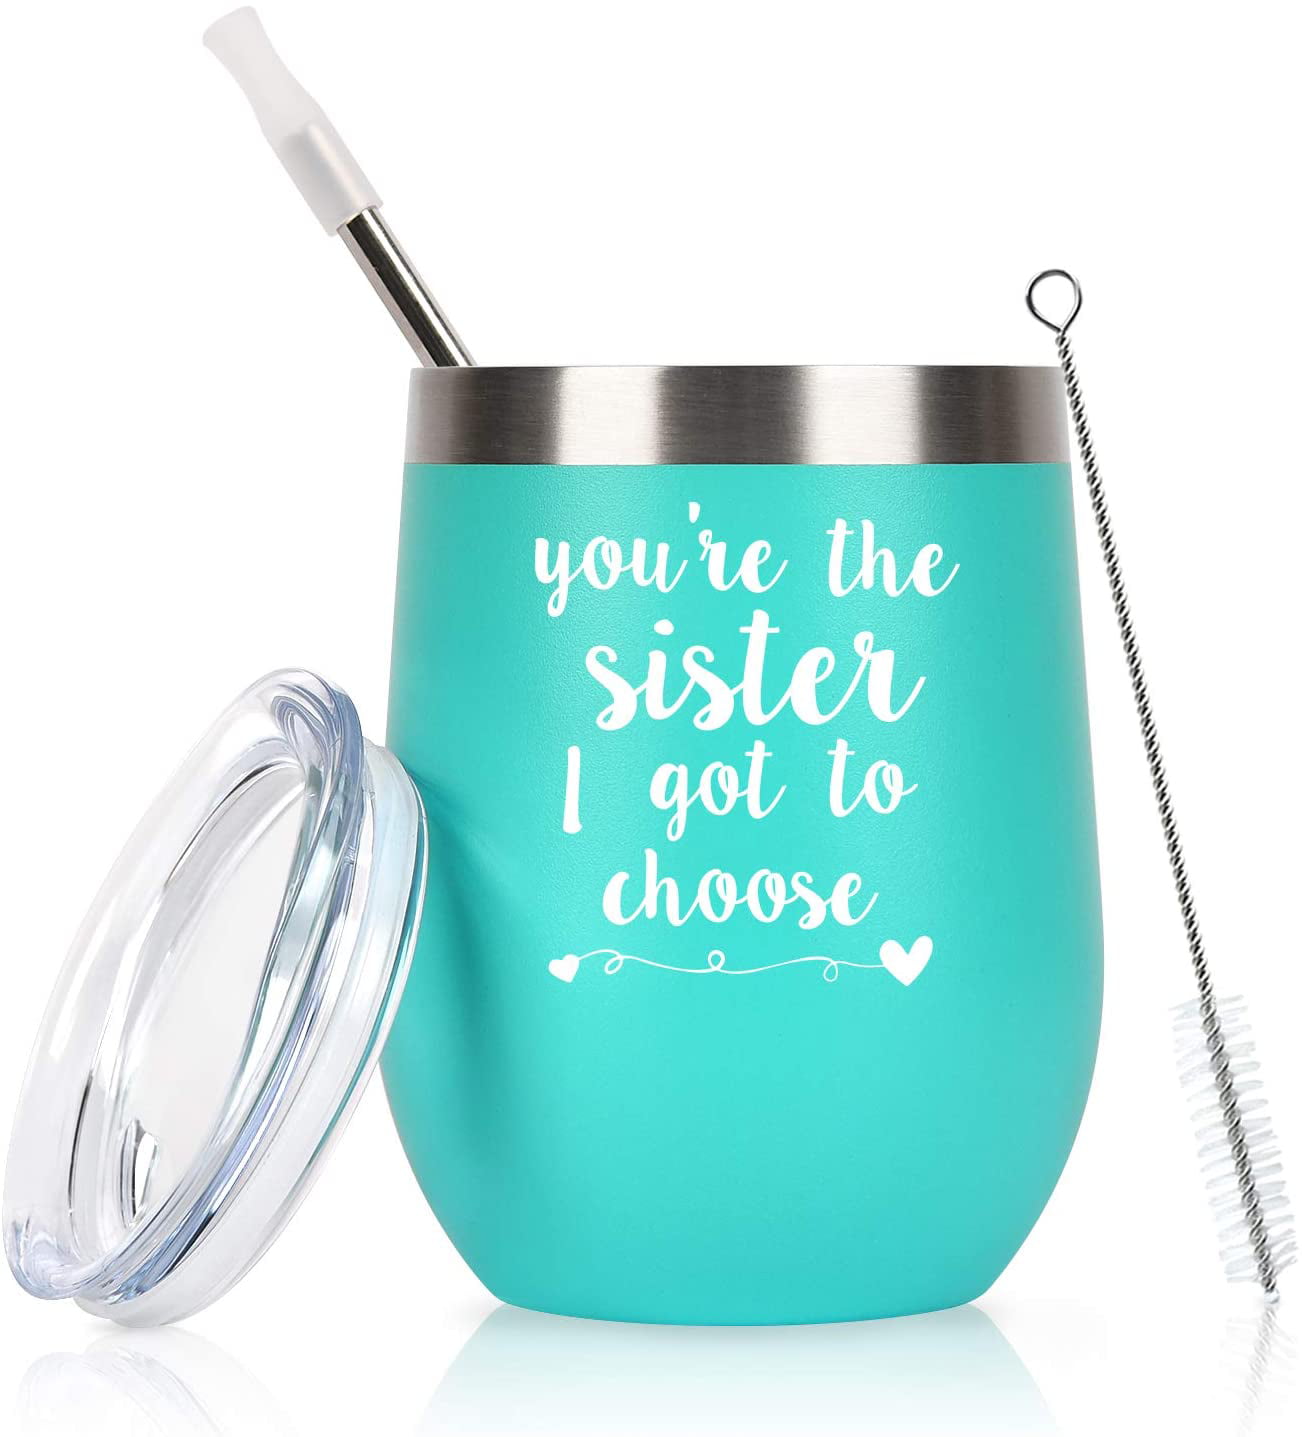 Unique Gifts for Women Birthday Gifts for Friends Female Wife Stainless Steel Insulated Wine Tumblers with Lid and Keychains Gifts Set for Friends Female Women Sister 